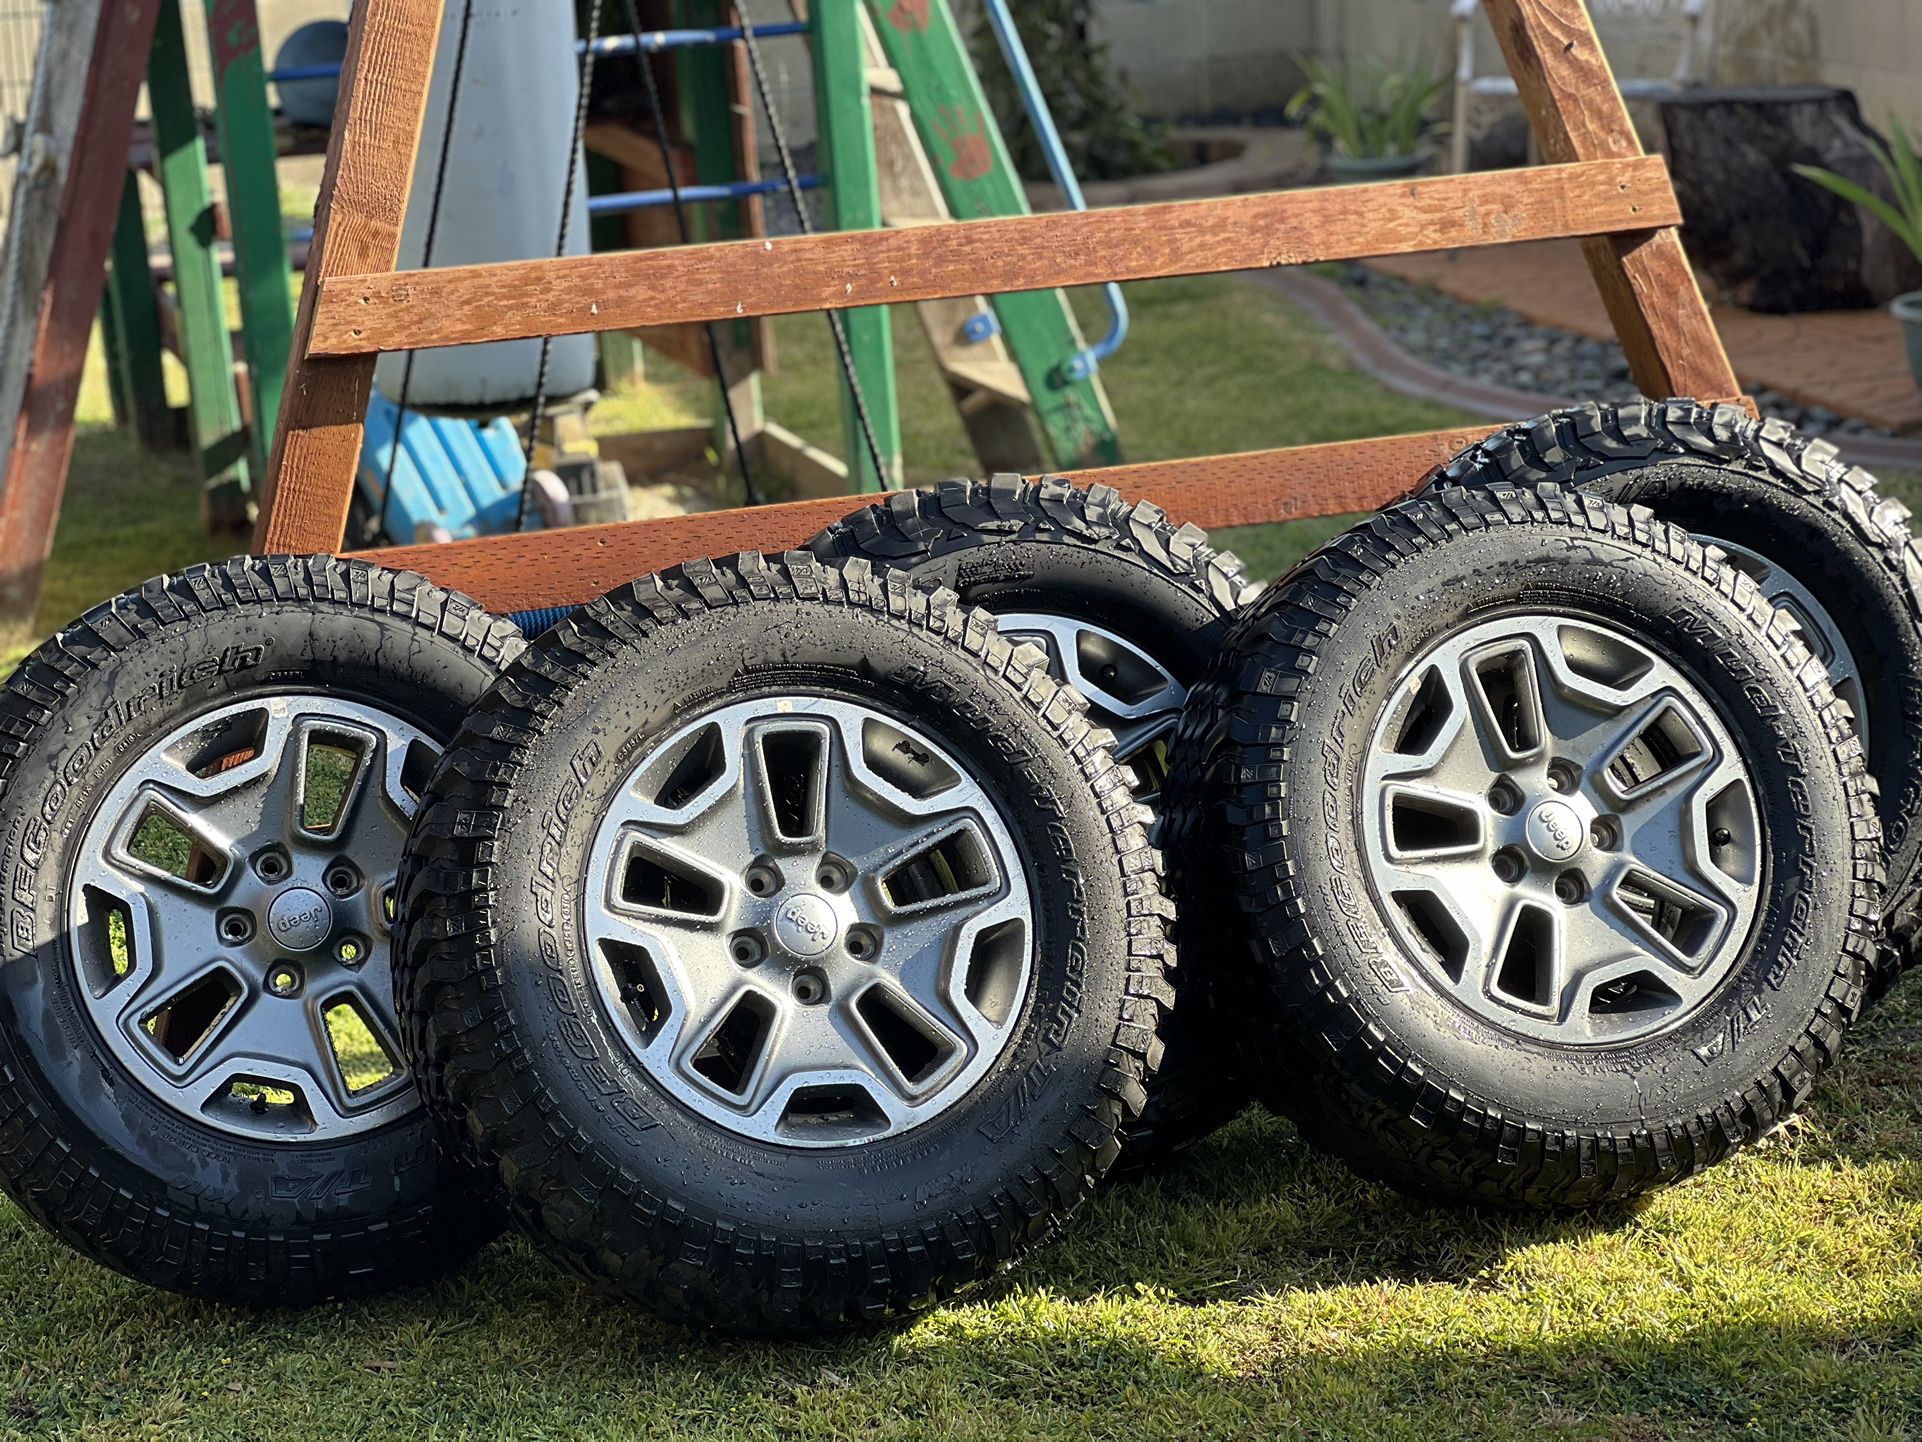 5 Jeep Rubicon Wheels And Tires